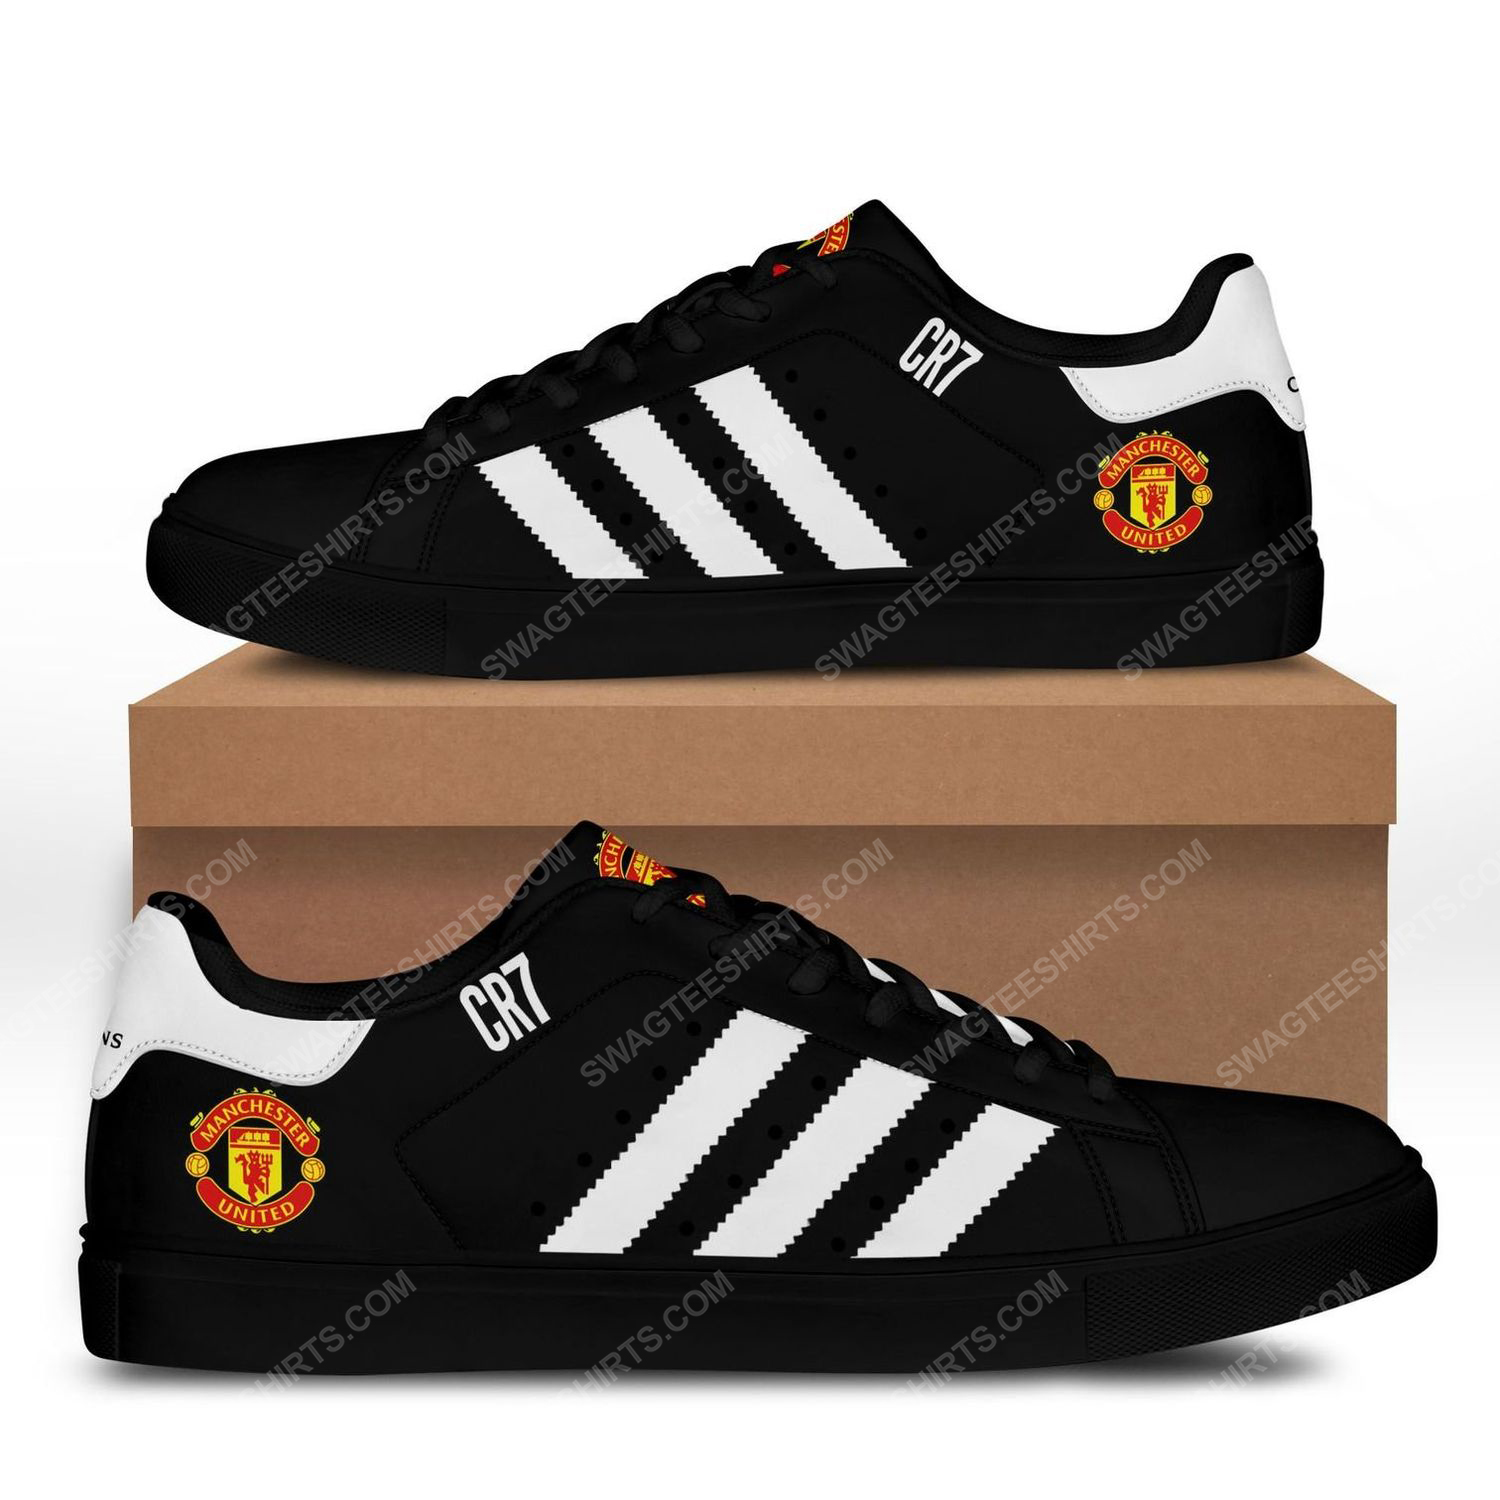 Manchester united football club cr7 stan smith shoes - black 1